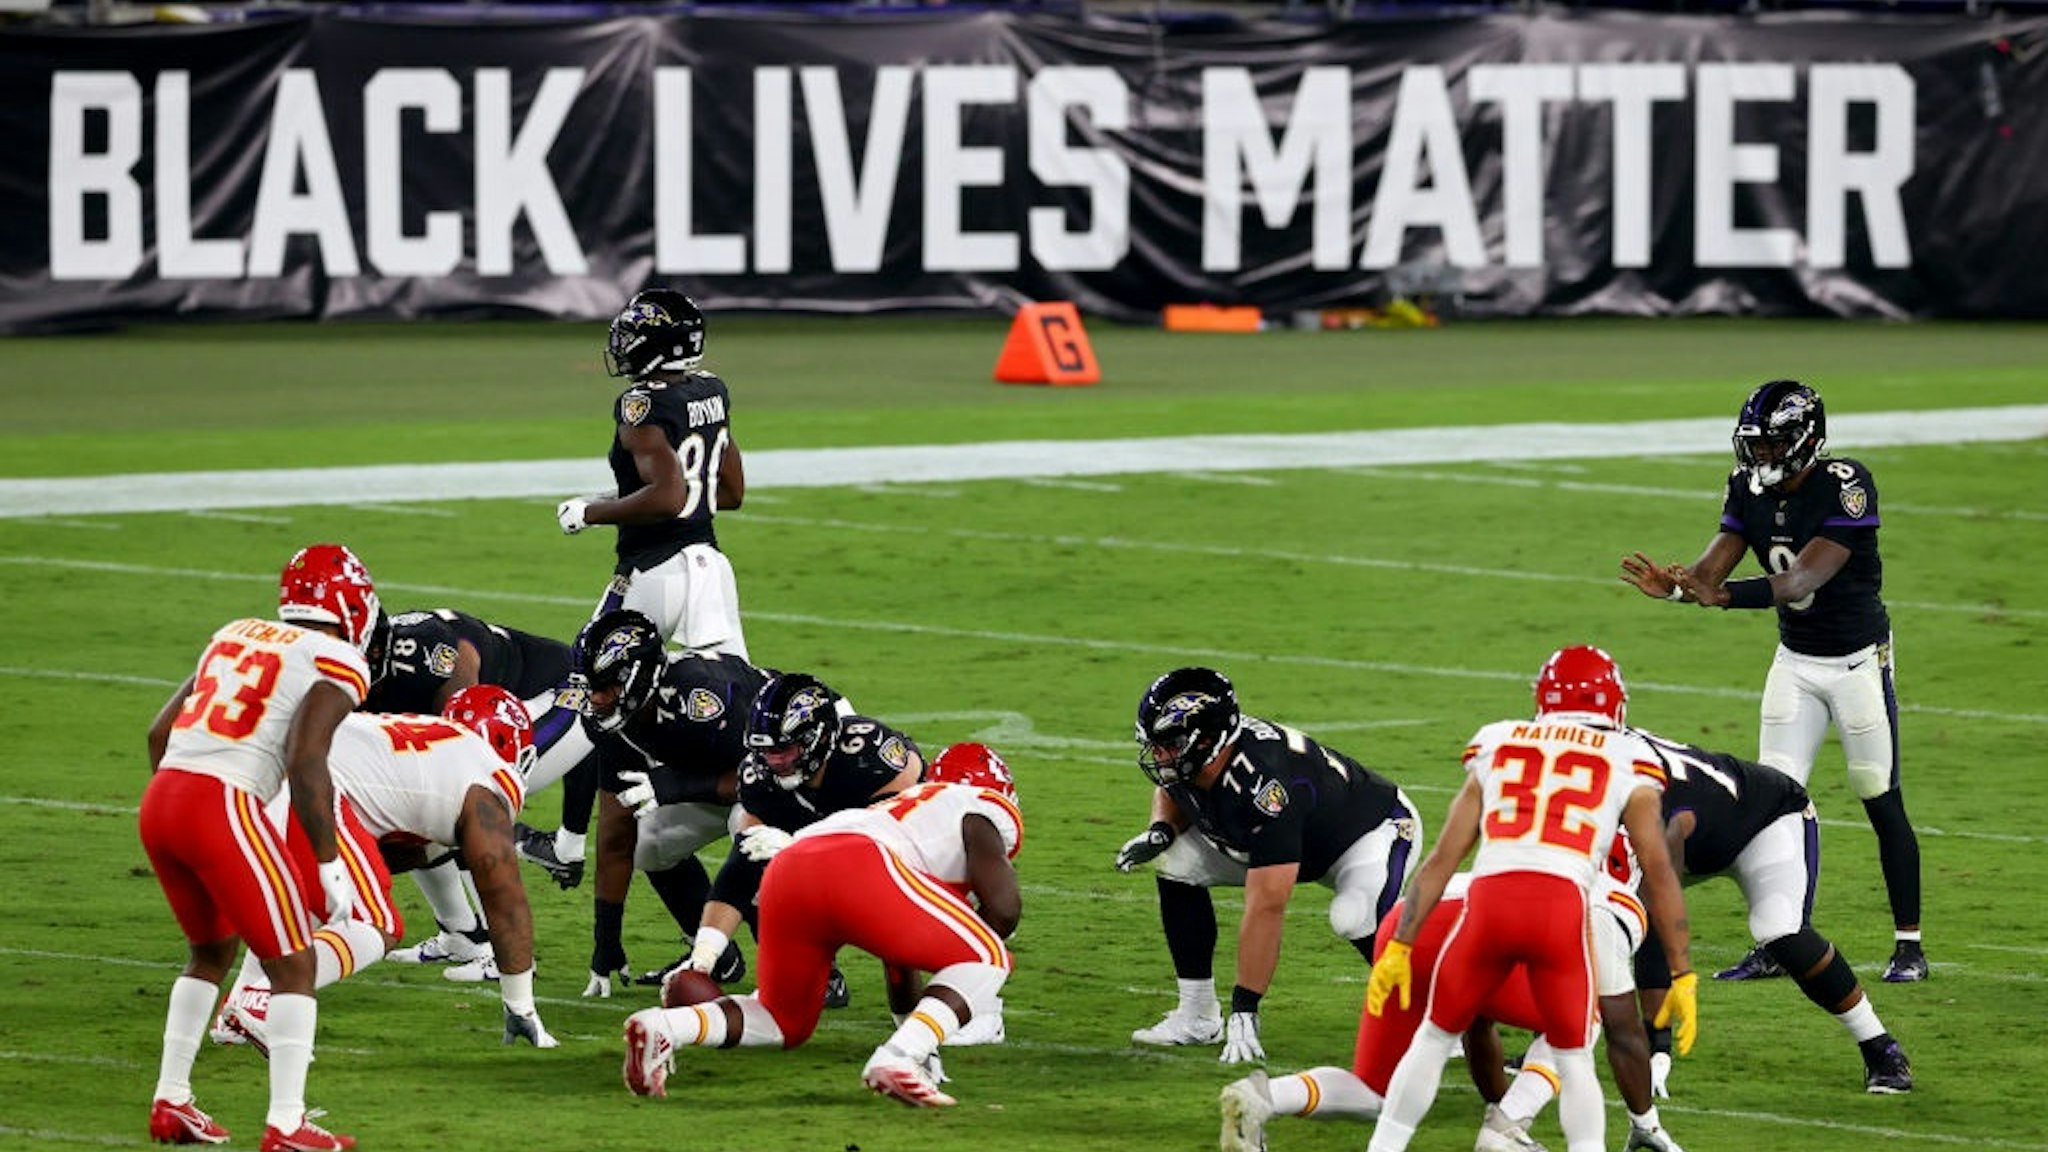 BALTIMORE, MARYLAND - SEPTEMBER 28: Lamar Jackson #8 of the Baltimore Ravens waits for the snap in front a sign that reads "Black Lives Matter" against the Kansas City Chiefs on September 28, 2020.